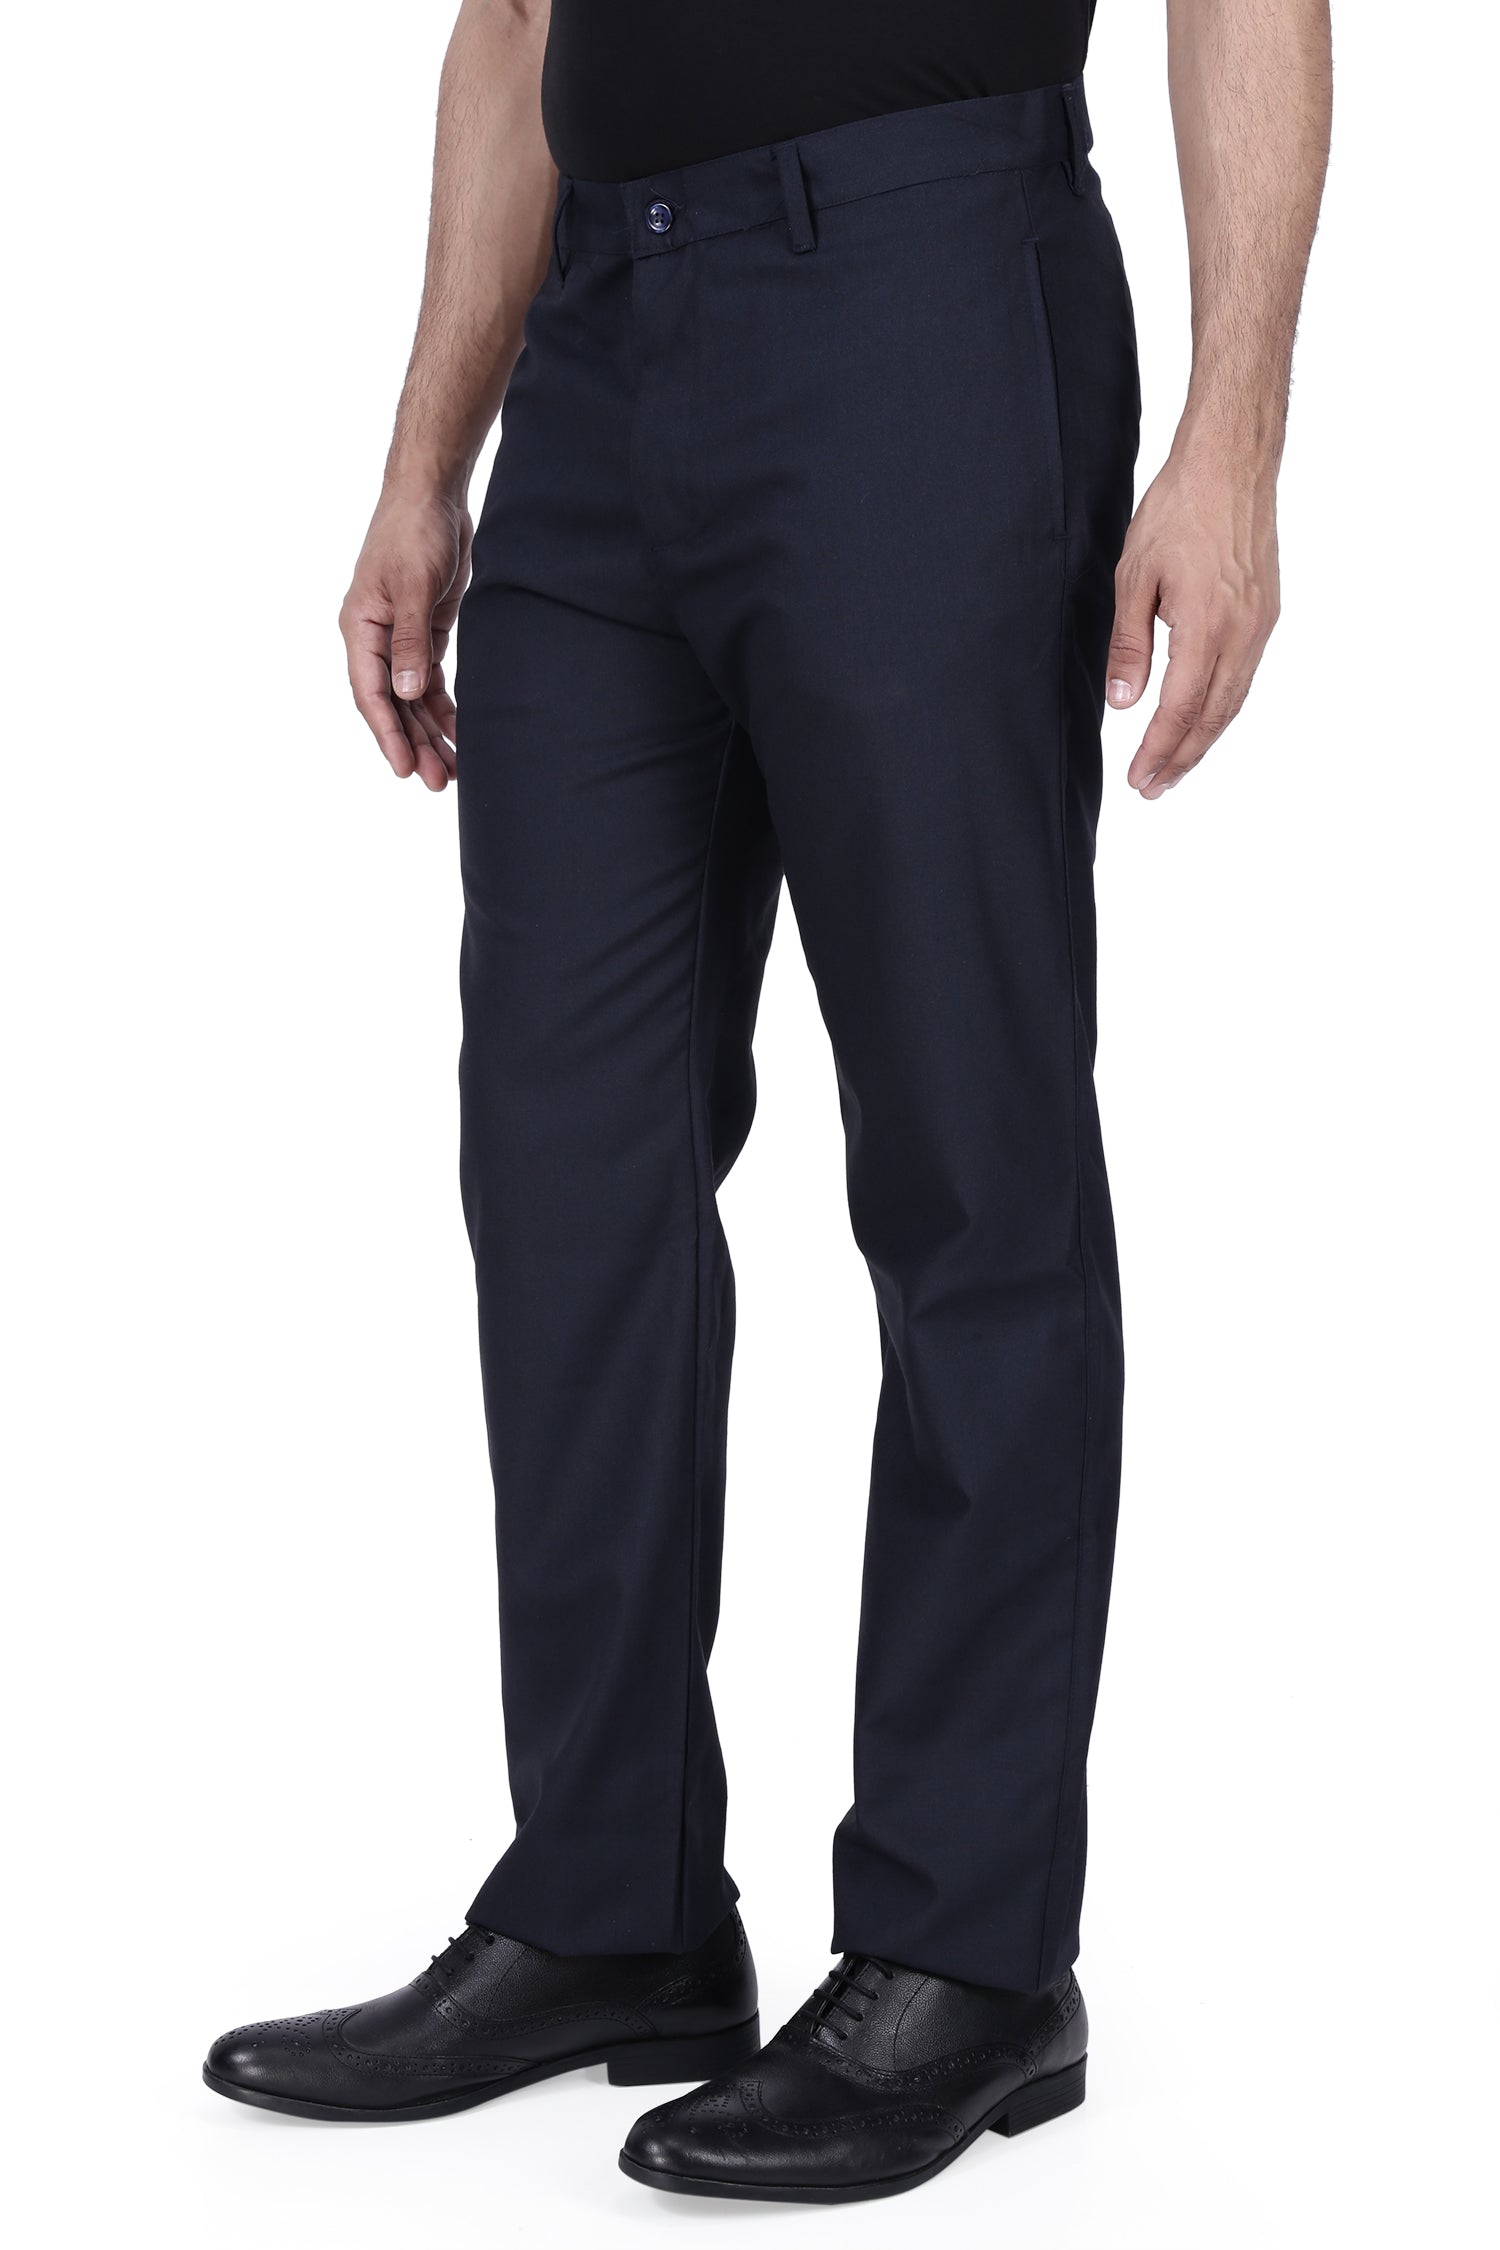 Buy NORTHPOLE Mens Formal Trouser for Men Casual Navy Blue Formal Pants for  Men at Amazon.in